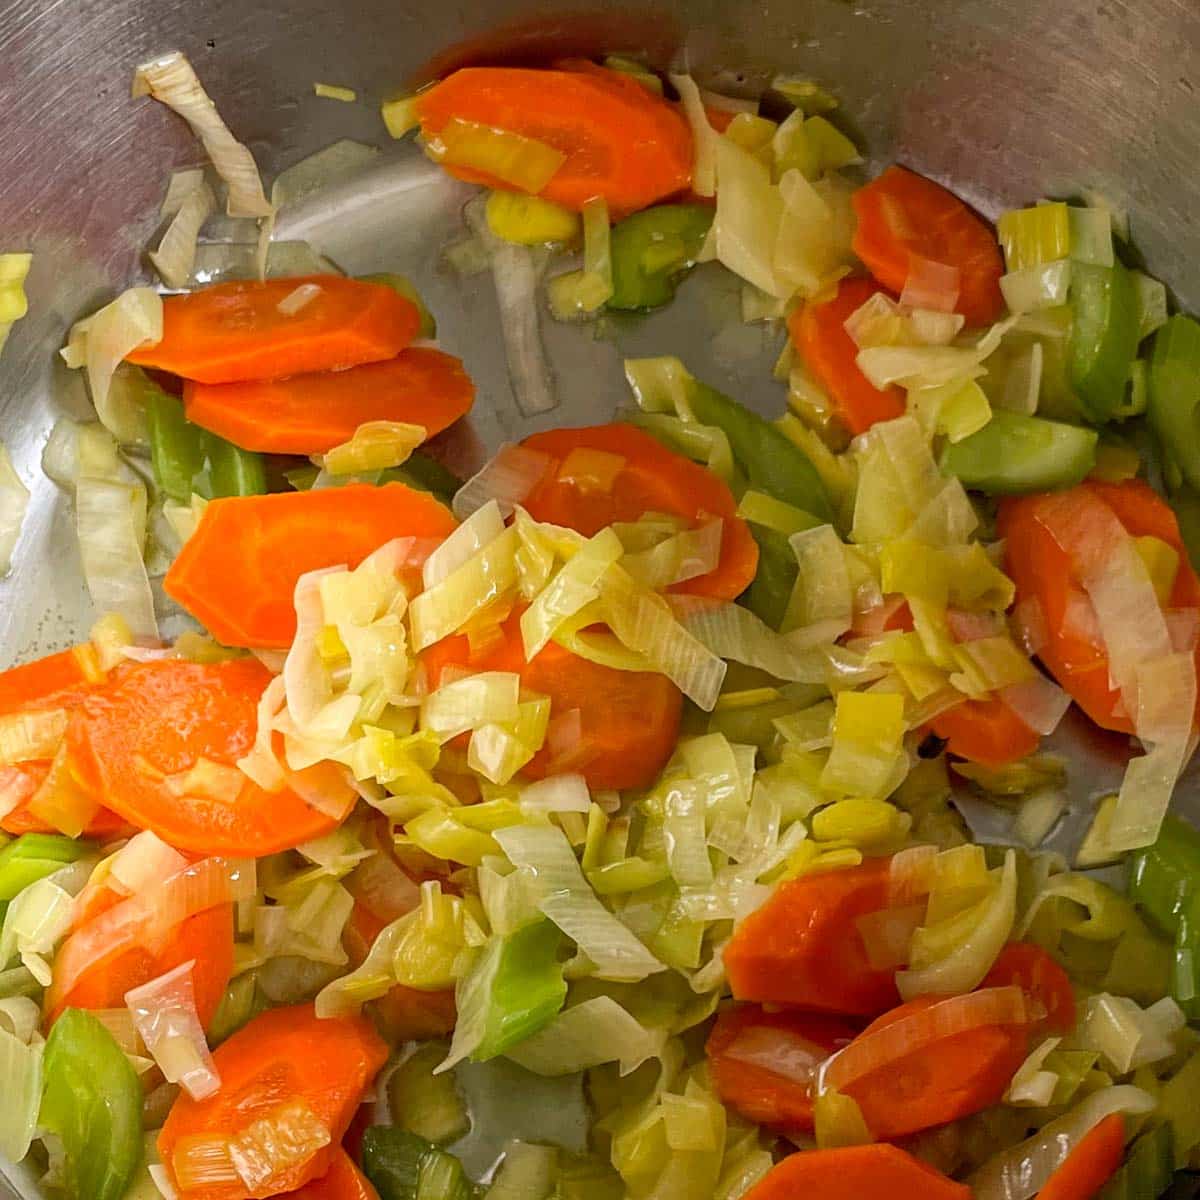 Sauteed carrot, celery, and leek are shown in a stainless steel pot.